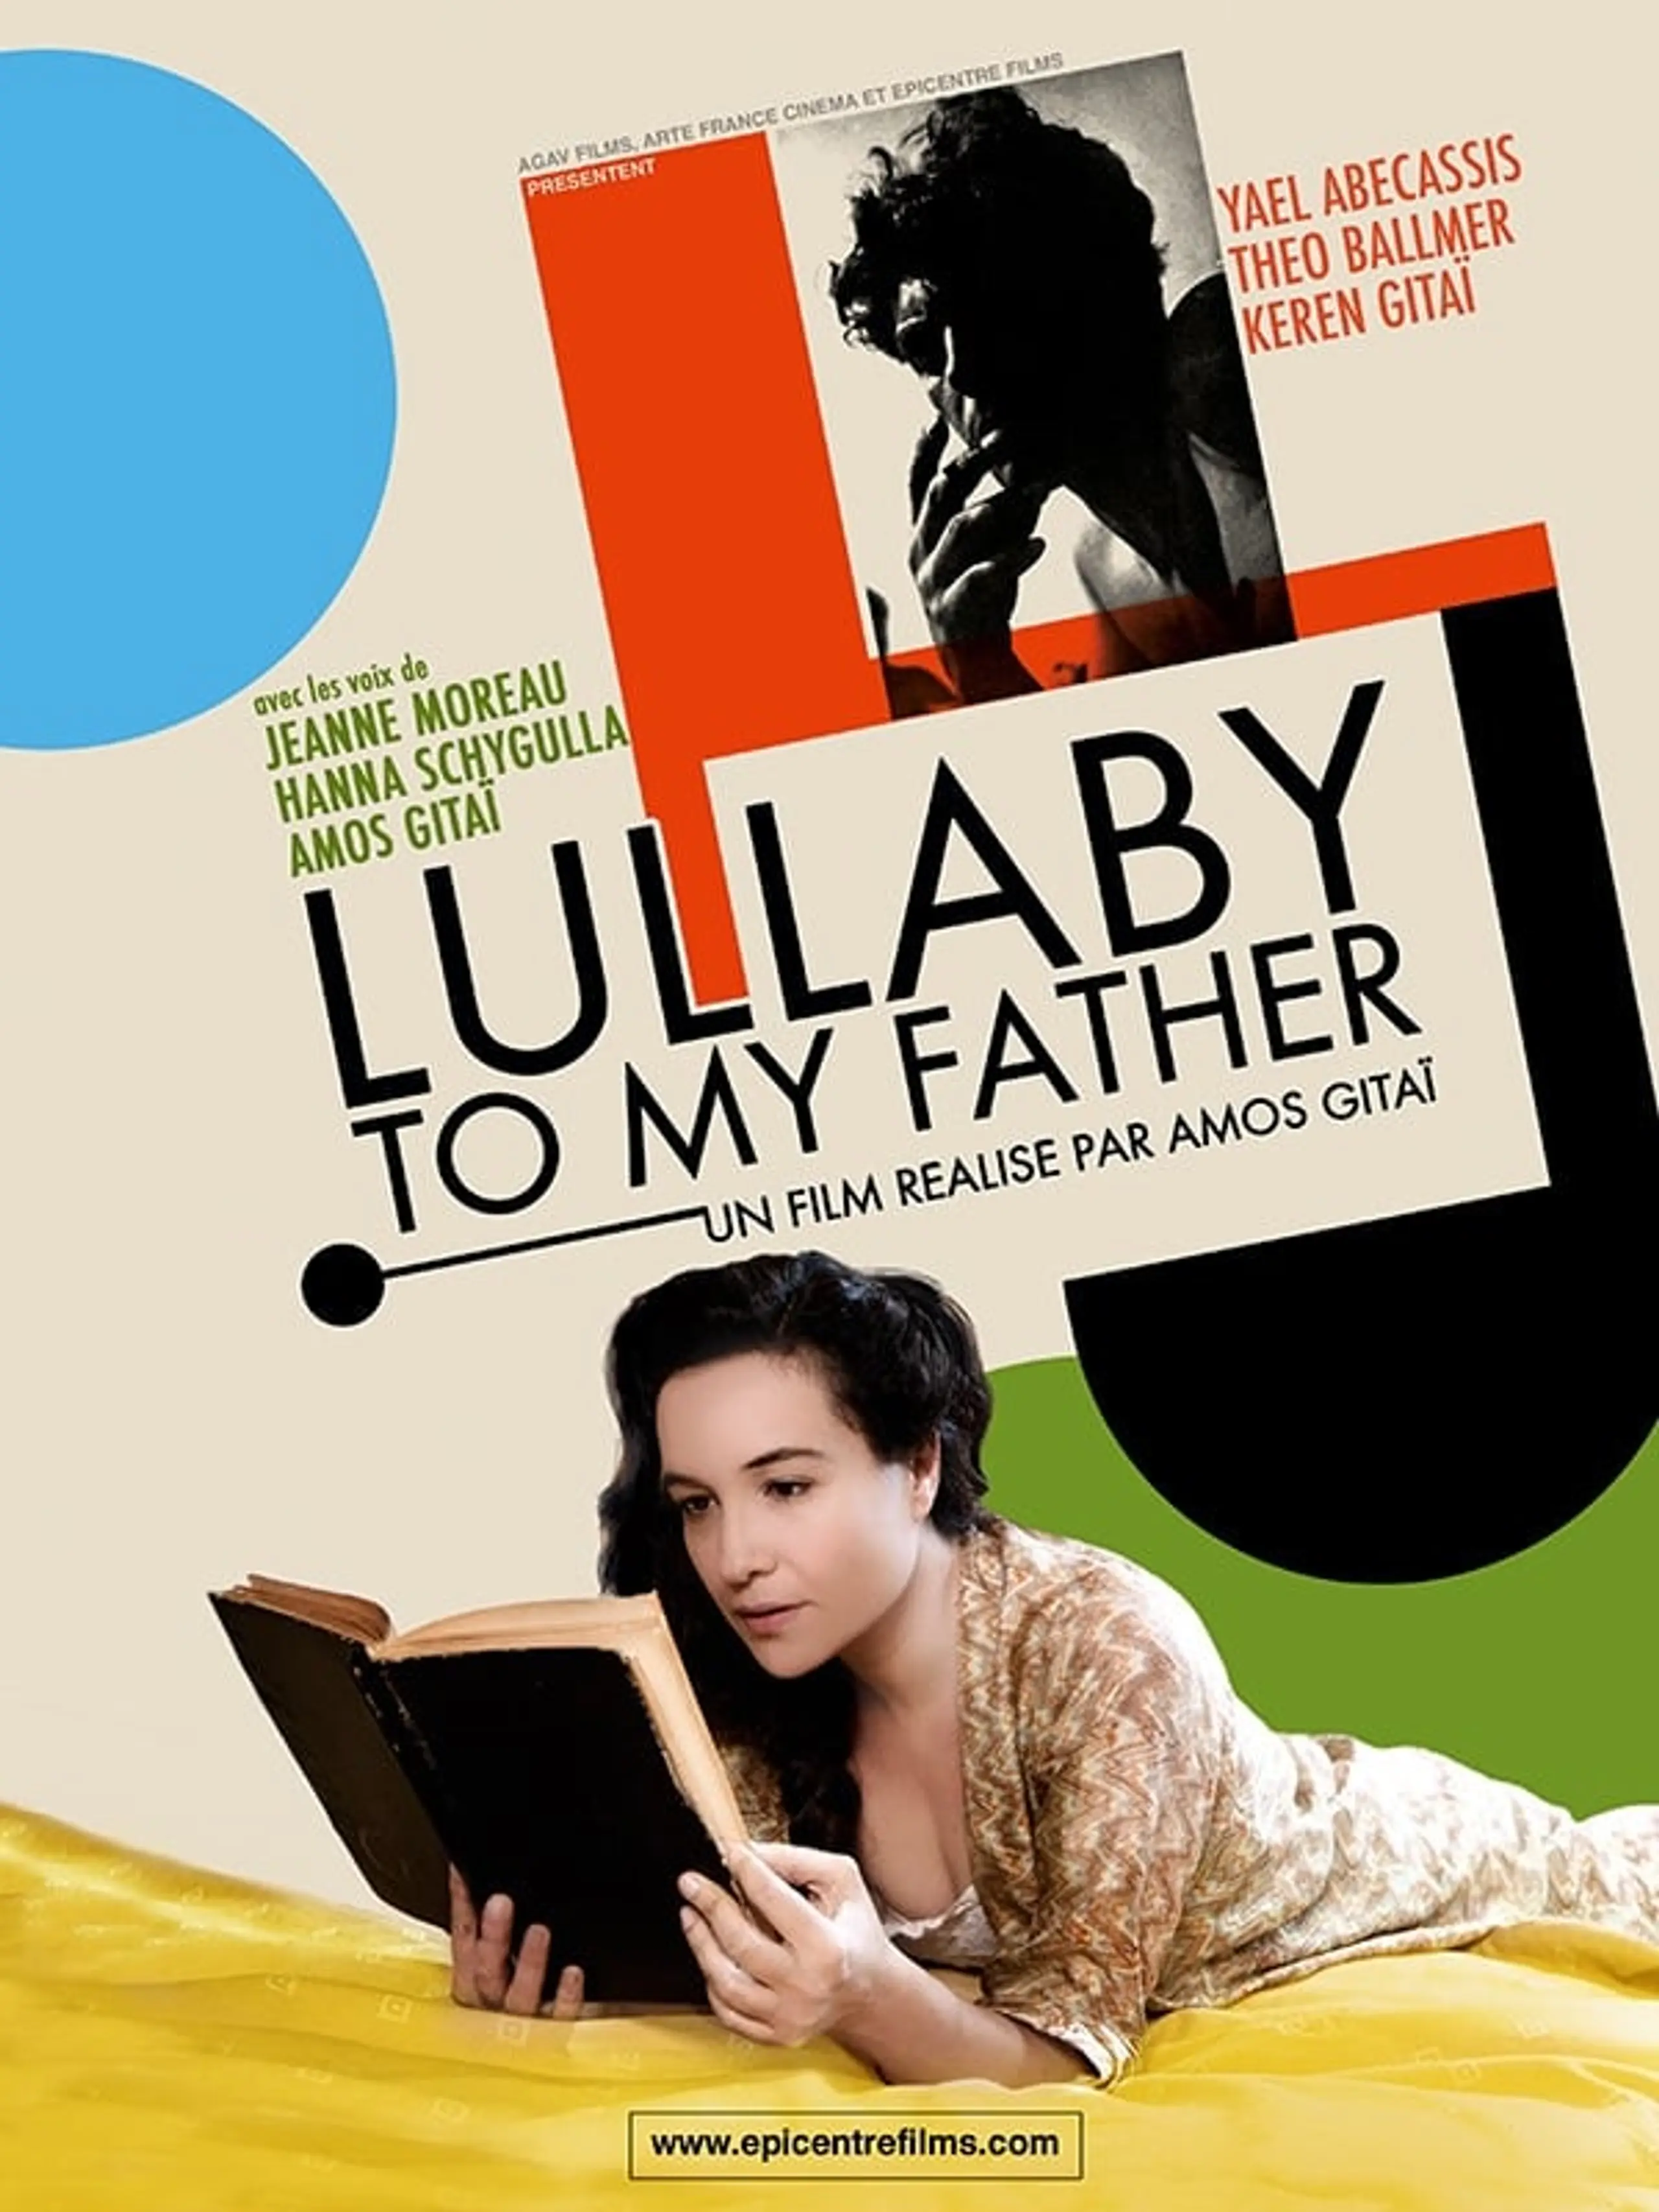 Lullaby to my Father